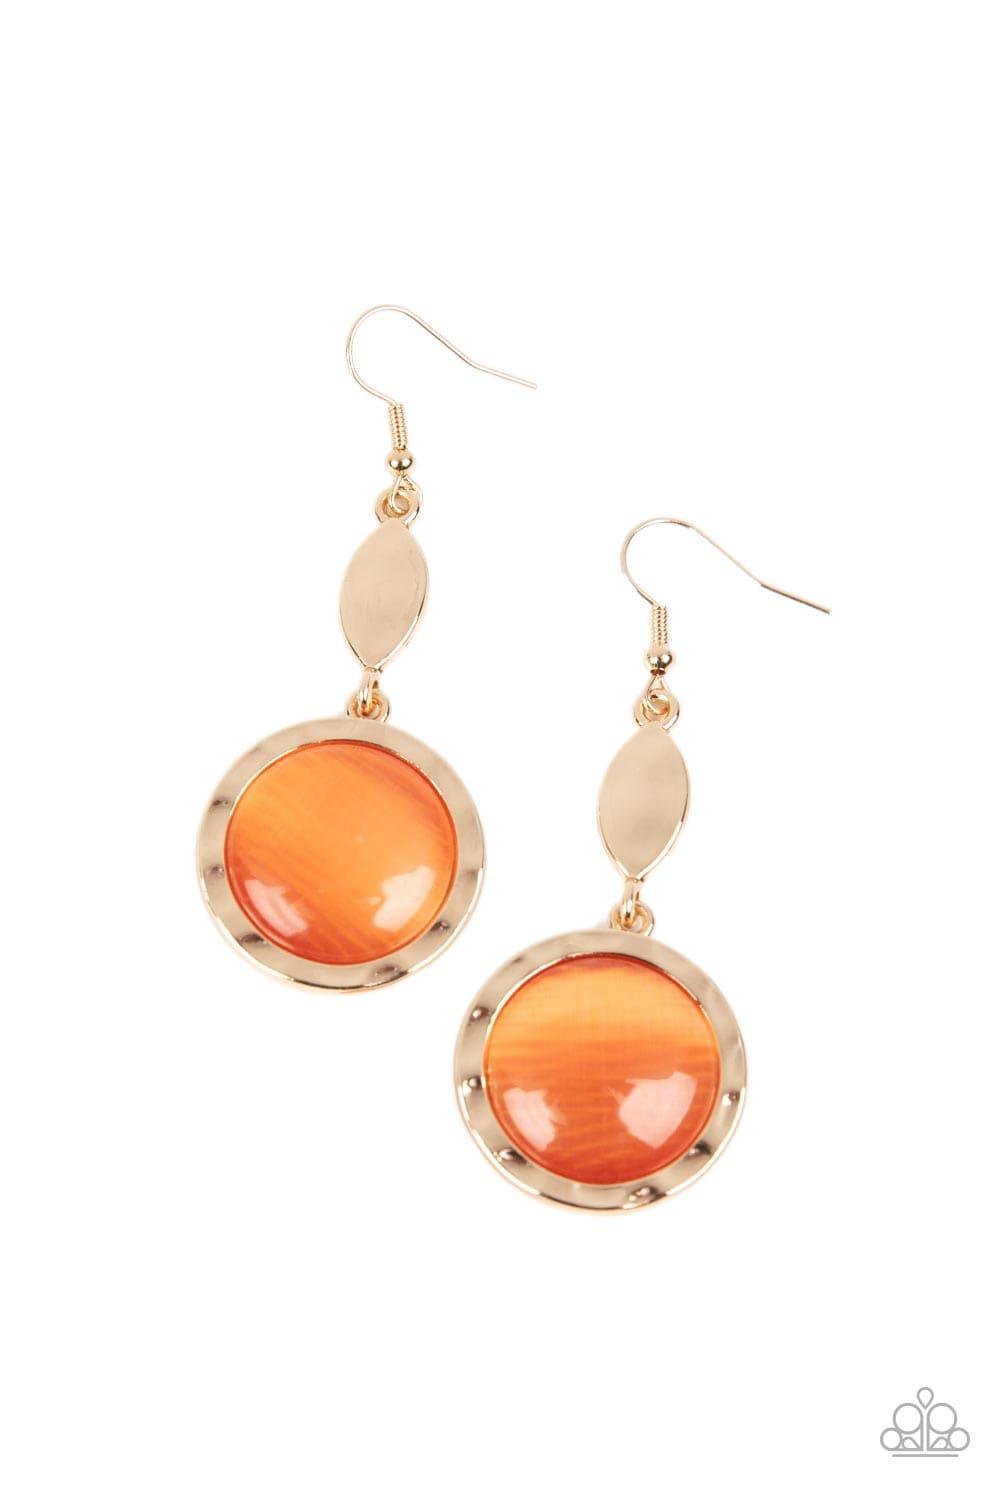 Paparazzi Accessories - Magically Magnificent - Orange Earrings - Bling by JessieK